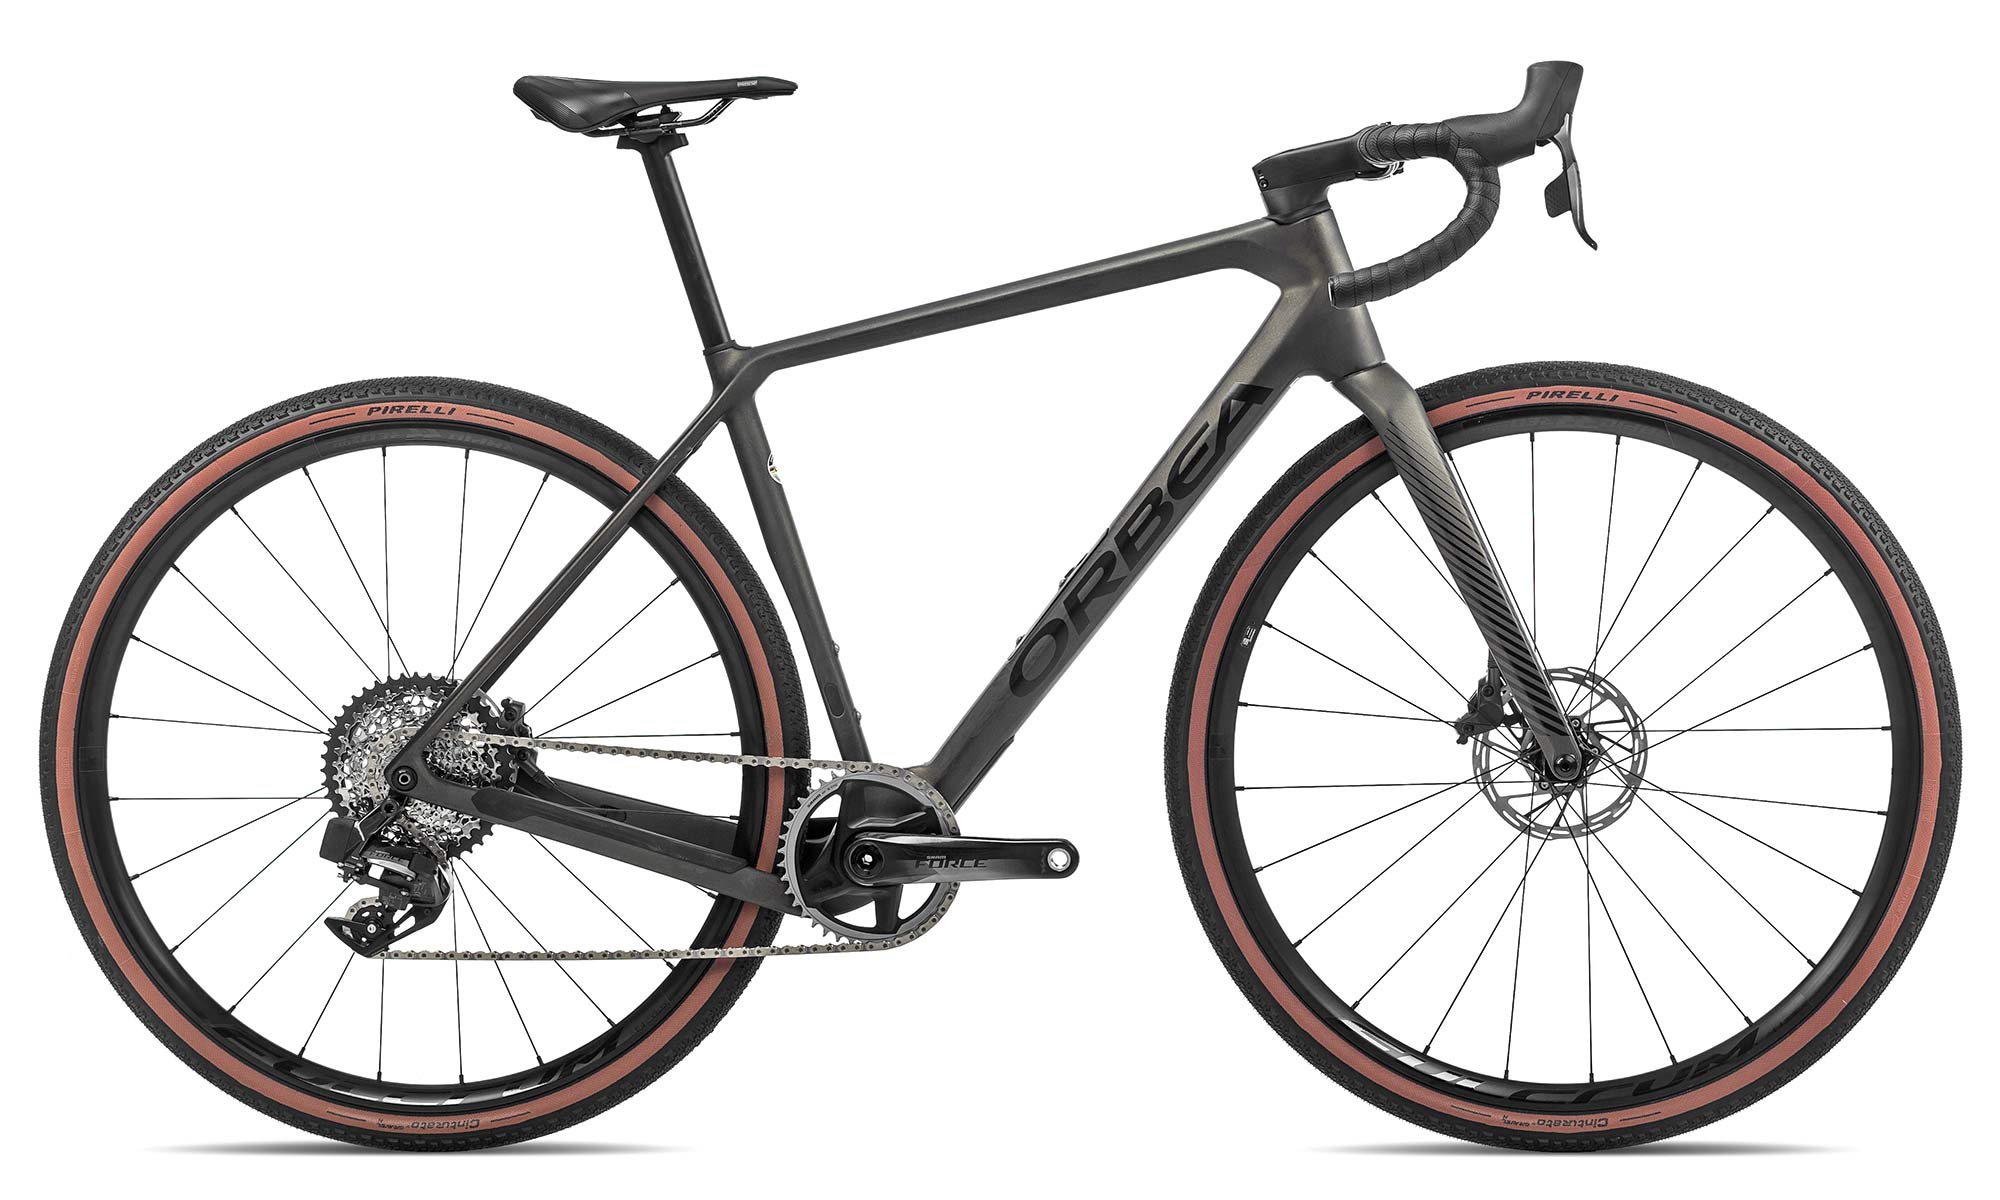 2022 Orbea Terra carbon gravel bike, all-new adventure-ready gravel all-road, Force AXS